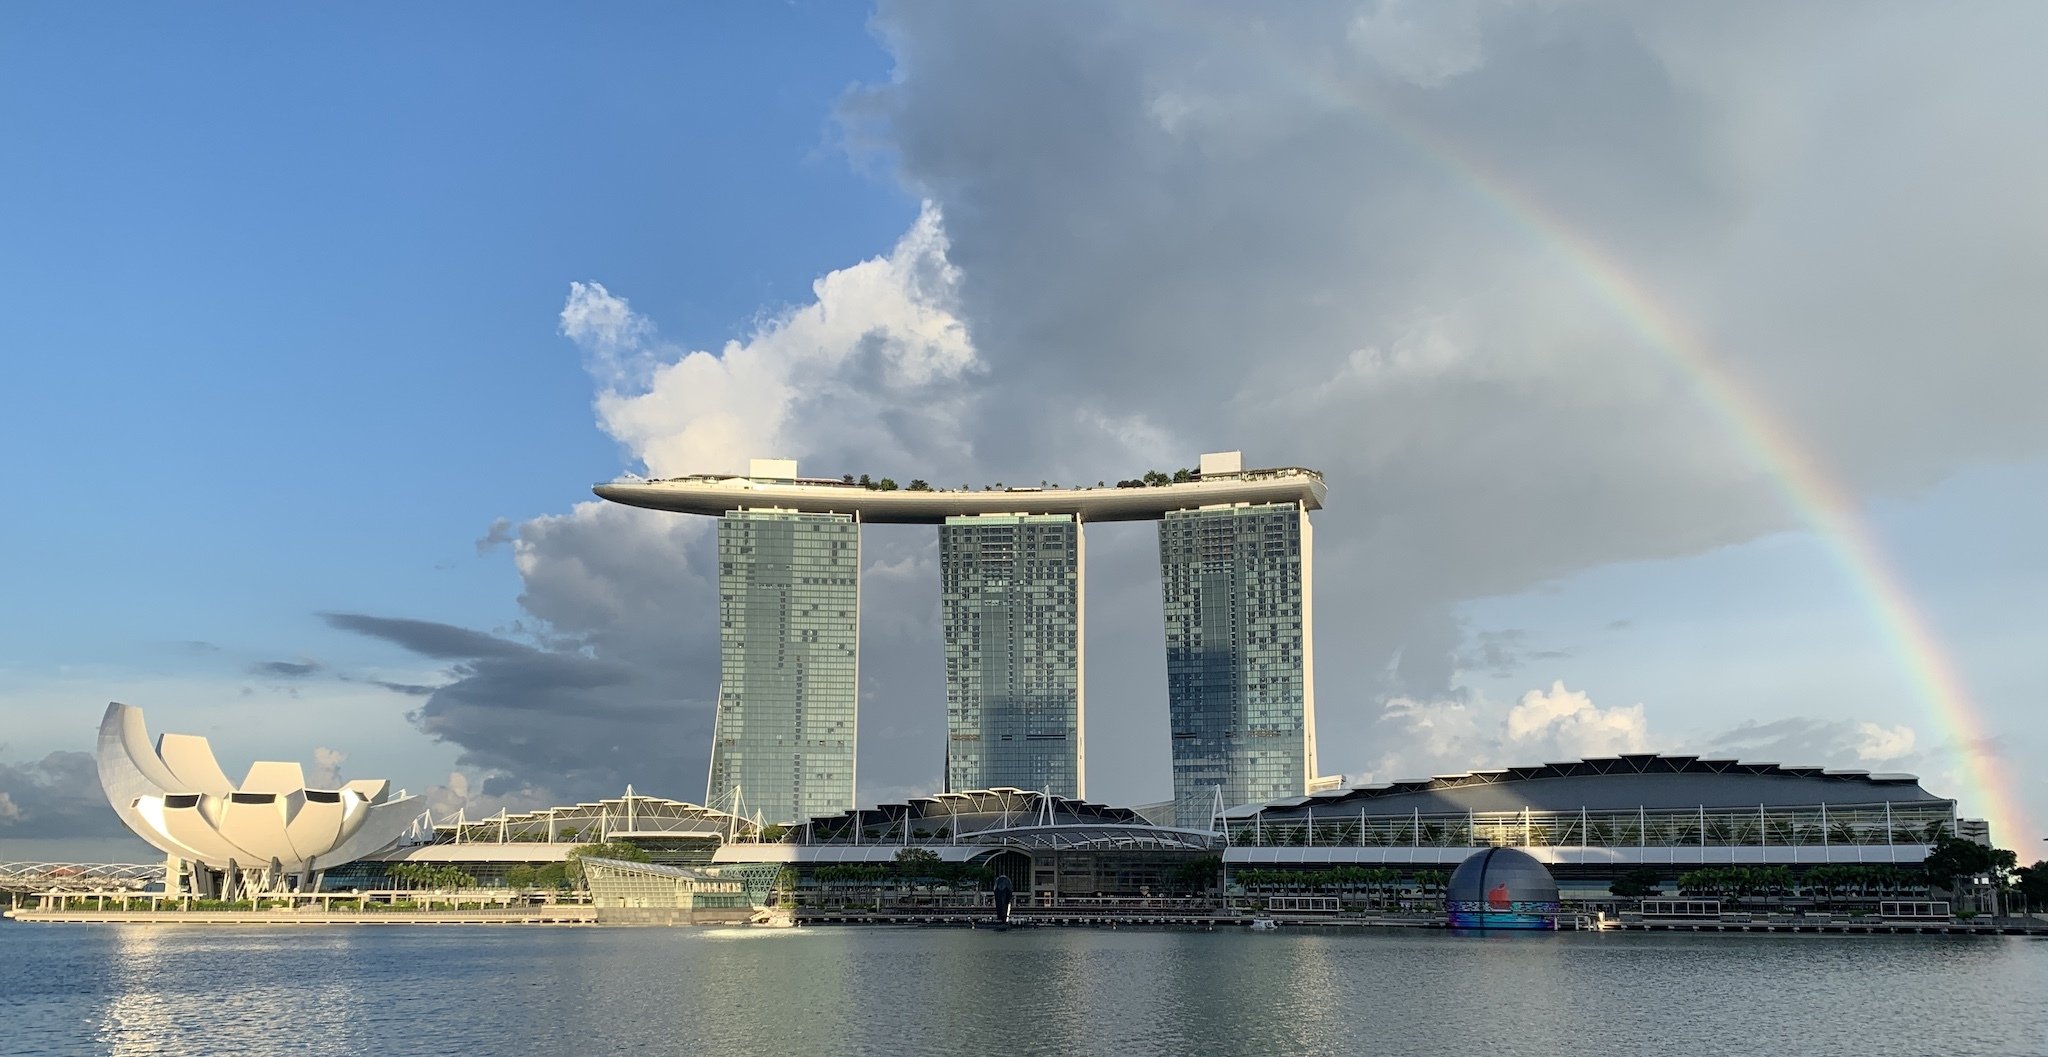 Marina Bay Sands hires law firm to probe over $1.36 billion in